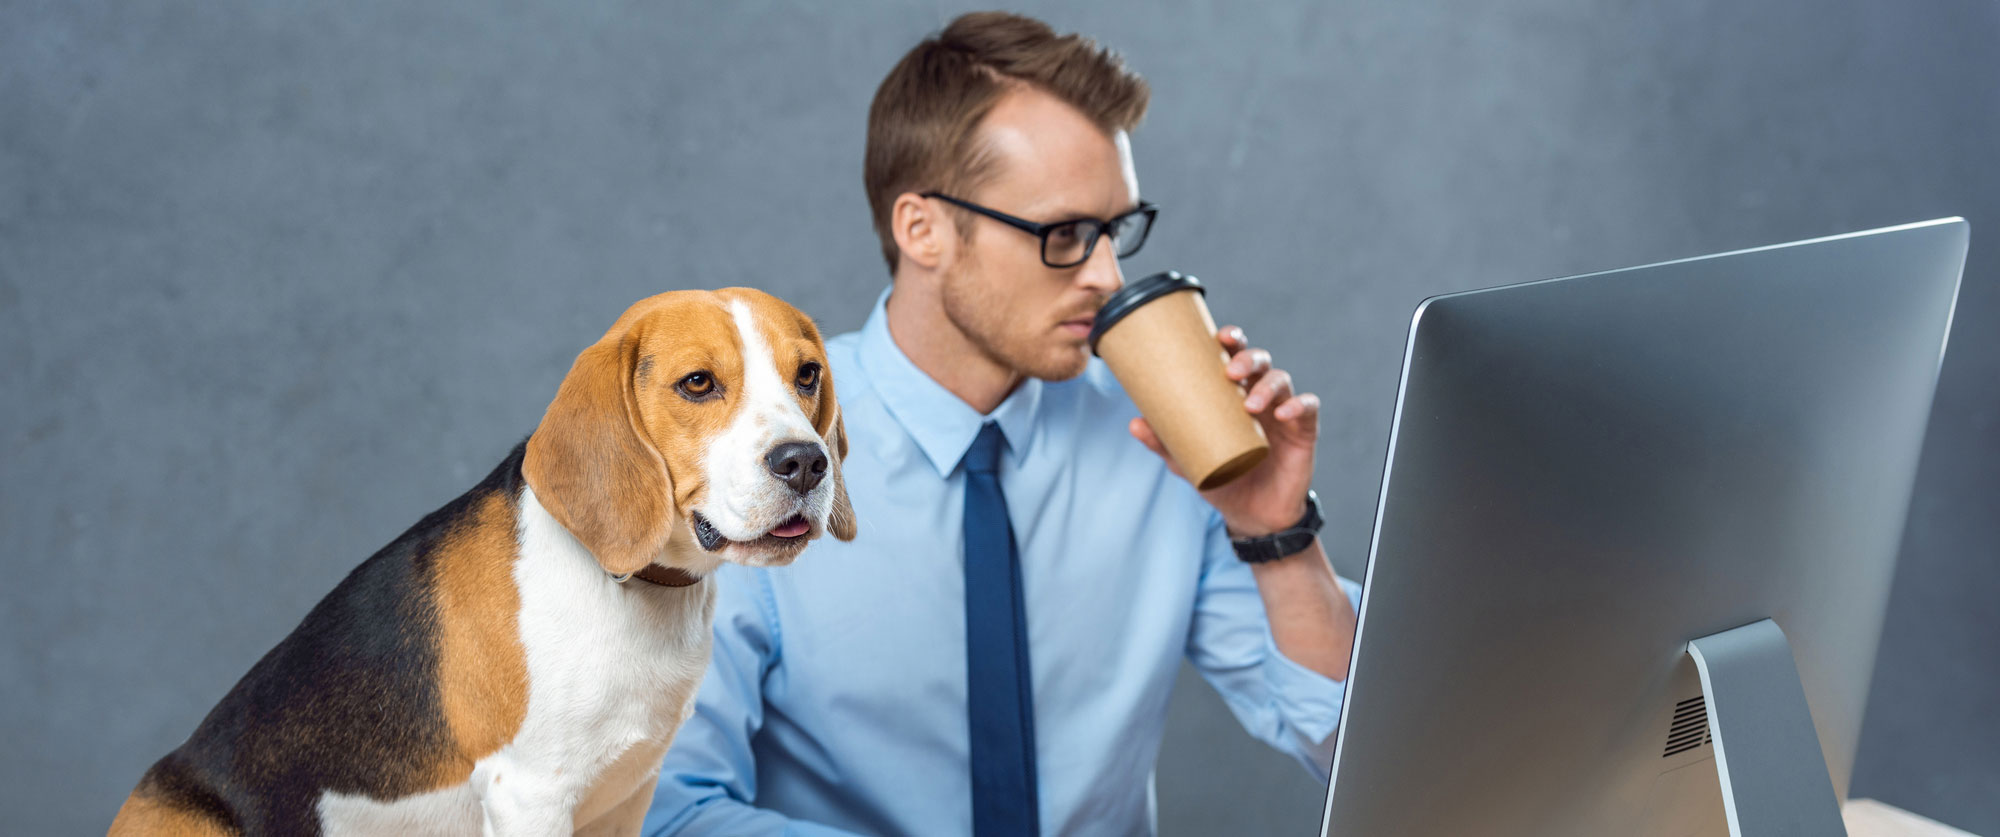 An individual in a blue collared shirt and tie drinks coffee while working on a computer at a desk, with a small puppy sitting on the desk next to them. 